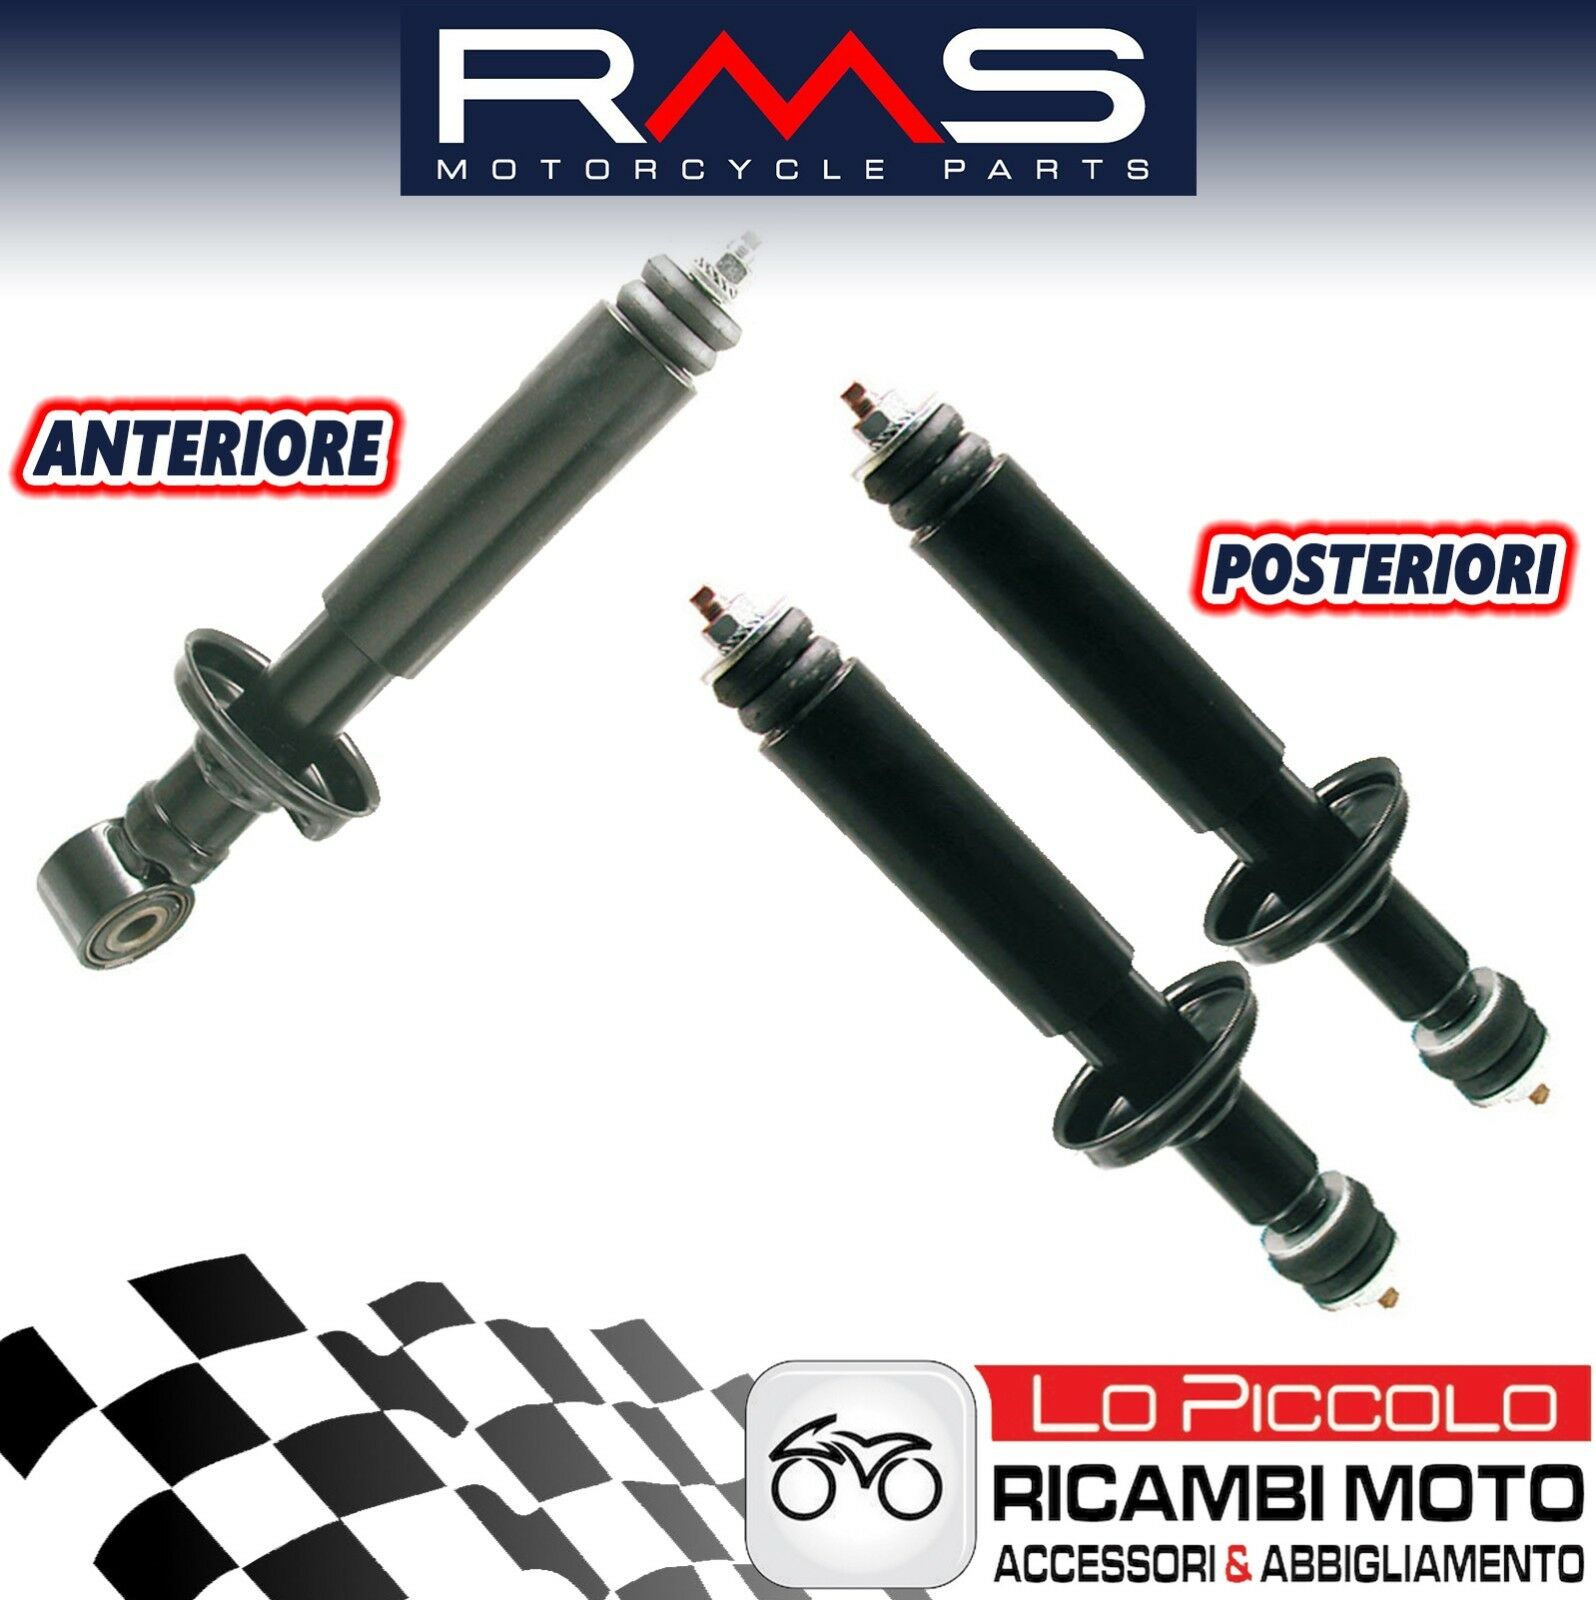 Set 3 Rear Shock Absorbers+Front piaggio ape 50 Rst Mix ...